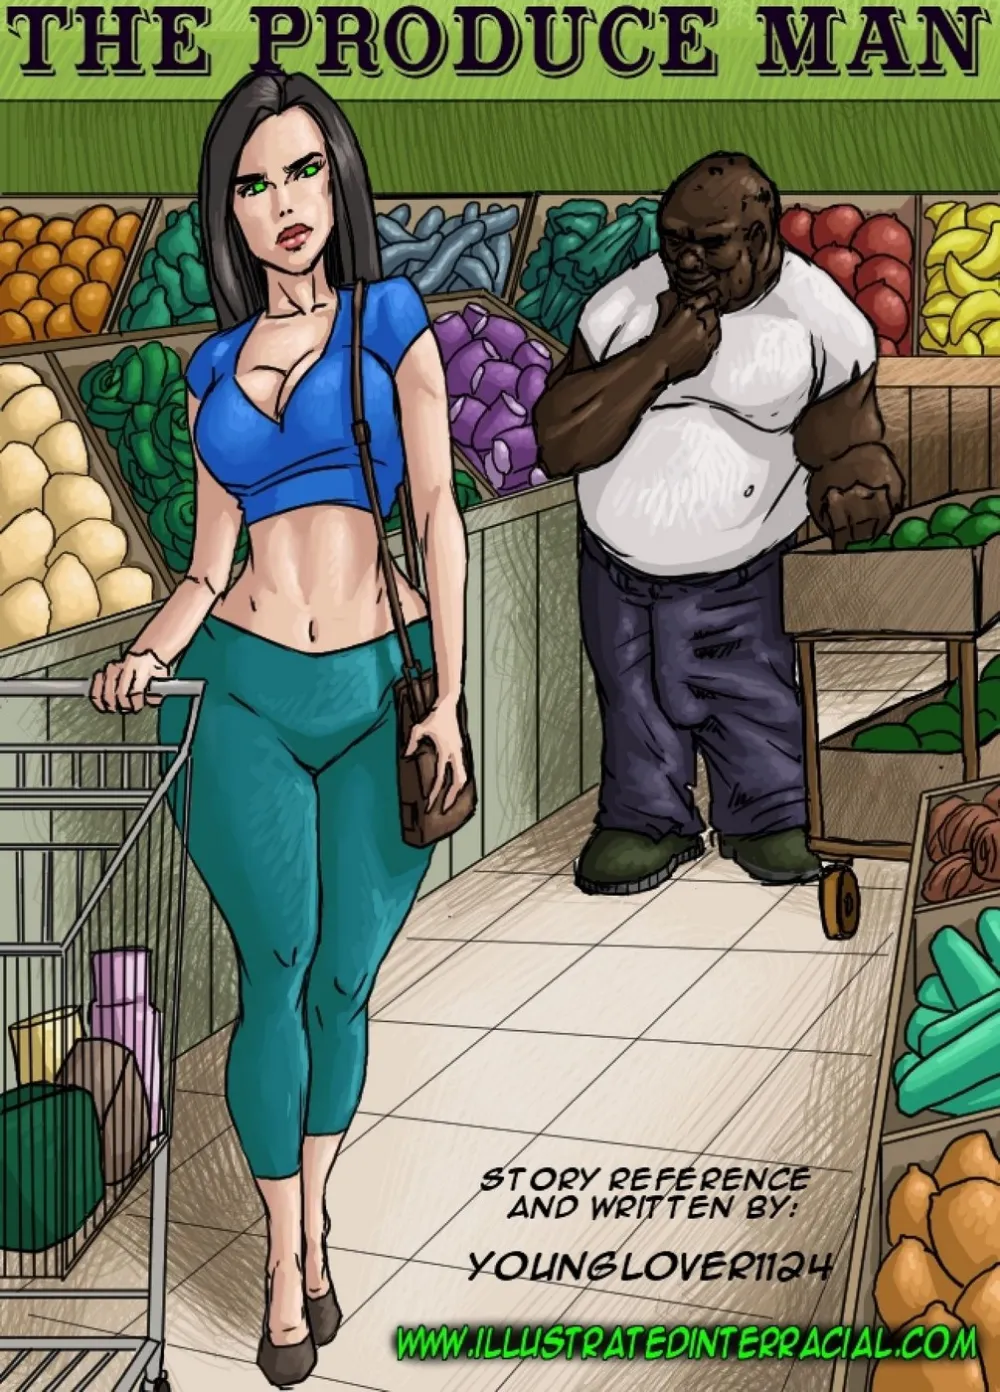 The Produce Man – Illustrated Interracial - Page 1